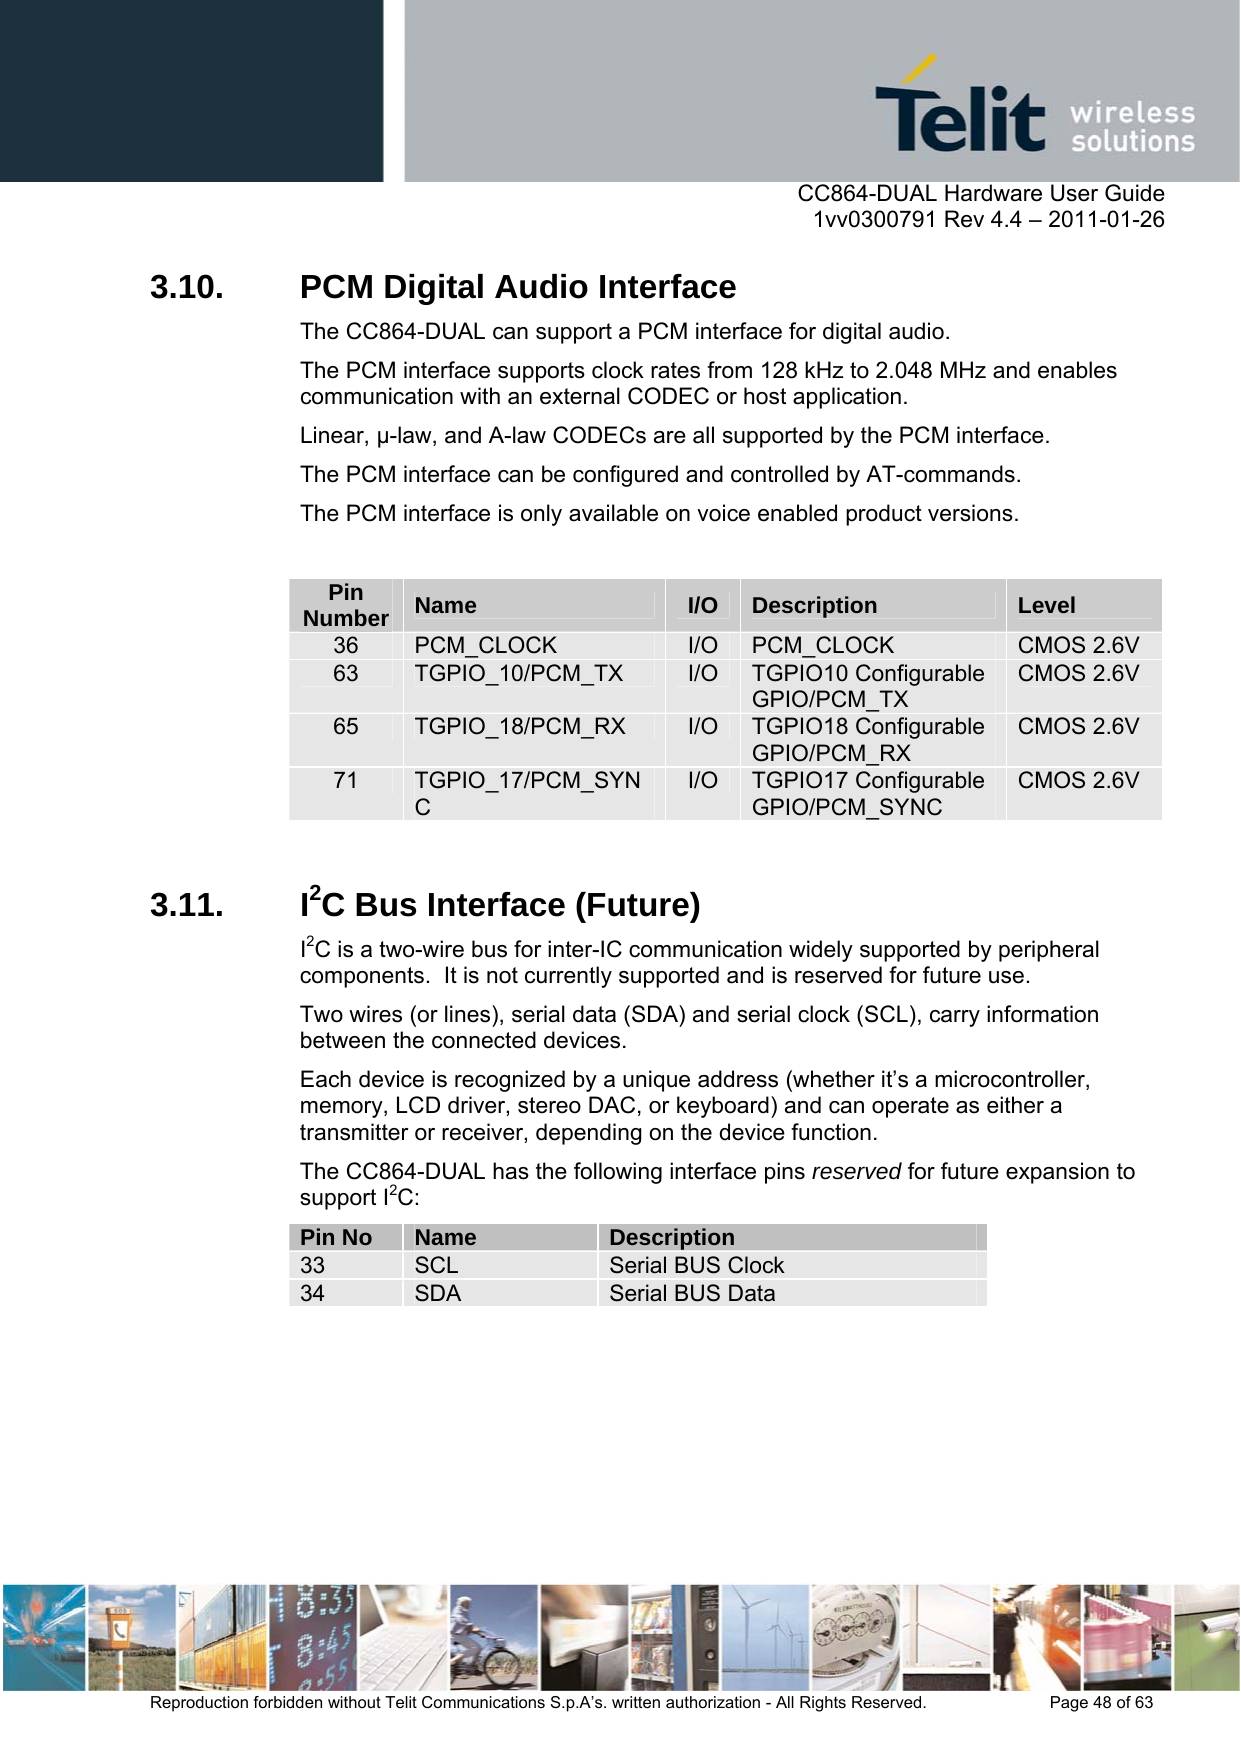      CC864-DUAL Hardware User Guide    1vv0300791 Rev 4.4 – 2011-01-26  Reproduction forbidden without Telit Communications S.p.A’s. written authorization - All Rights Reserved.    Page 48 of 63  3.10.  PCM Digital Audio Interface The CC864-DUAL can support a PCM interface for digital audio.  The PCM interface supports clock rates from 128 kHz to 2.048 MHz and enables communication with an external CODEC or host application.  Linear, -law, and A-law CODECs are all supported by the PCM interface. The PCM interface can be configured and controlled by AT-commands. The PCM interface is only available on voice enabled product versions.  Pin Number  Name  I/O  Description  Level 36  PCM_CLOCK  I/O  PCM_CLOCK  CMOS 2.6V 63  TGPIO_10/PCM_TX  I/O  TGPIO10 Configurable GPIO/PCM_TX CMOS 2.6V 65  TGPIO_18/PCM_RX  I/O  TGPIO18 Configurable GPIO/PCM_RX CMOS 2.6V 71  TGPIO_17/PCM_SYNC I/O  TGPIO17 Configurable GPIO/PCM_SYNC CMOS 2.6V  3.11. I2C Bus Interface (Future) I2C is a two-wire bus for inter-IC communication widely supported by peripheral components.  It is not currently supported and is reserved for future use. Two wires (or lines), serial data (SDA) and serial clock (SCL), carry information between the connected devices.  Each device is recognized by a unique address (whether it’s a microcontroller, memory, LCD driver, stereo DAC, or keyboard) and can operate as either a transmitter or receiver, depending on the device function. The CC864-DUAL has the following interface pins reserved for future expansion to support I2C: Pin No  Name  Description 33  SCL  Serial BUS Clock 34  SDA  Serial BUS Data  